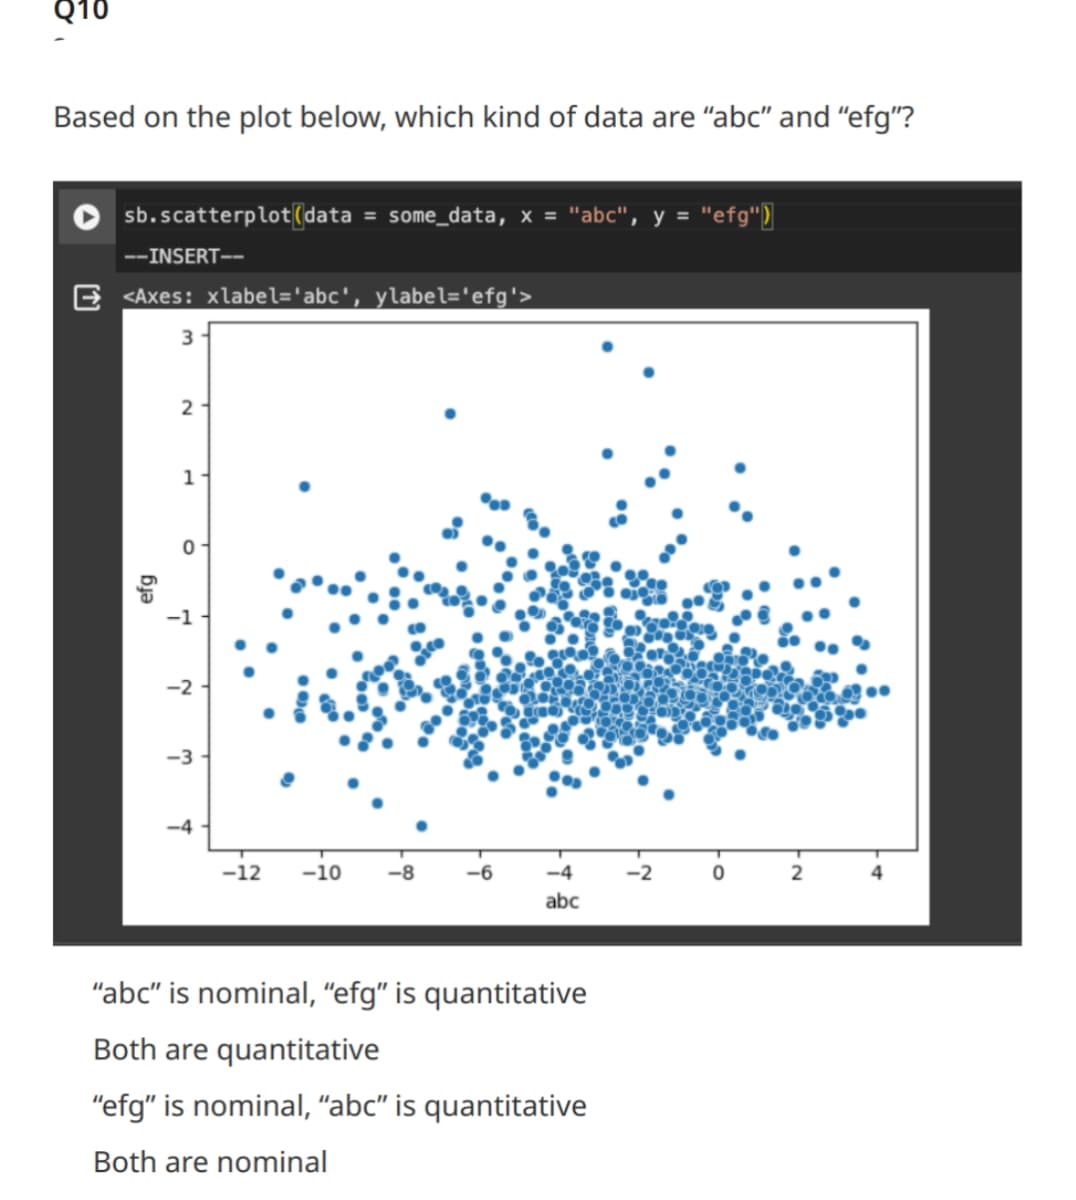 Q10
Based on the plot below, which kind of data are "abc" and "efg"?
sb.scatterplot (data = some_data, x = "abc", y = "efg")
--INSERT--
<Axes: xlabel='abc', ylabel='efg'>
3
efg
2
1
-1
-2
-3
-4
-12 -10 -8
-6
-4
abc
"abc" is nominal, "efg" is quantitative
Both are quantitative
"efg" is nominal, "abc" is quantitative
Both are nominal
-2
0
2
4